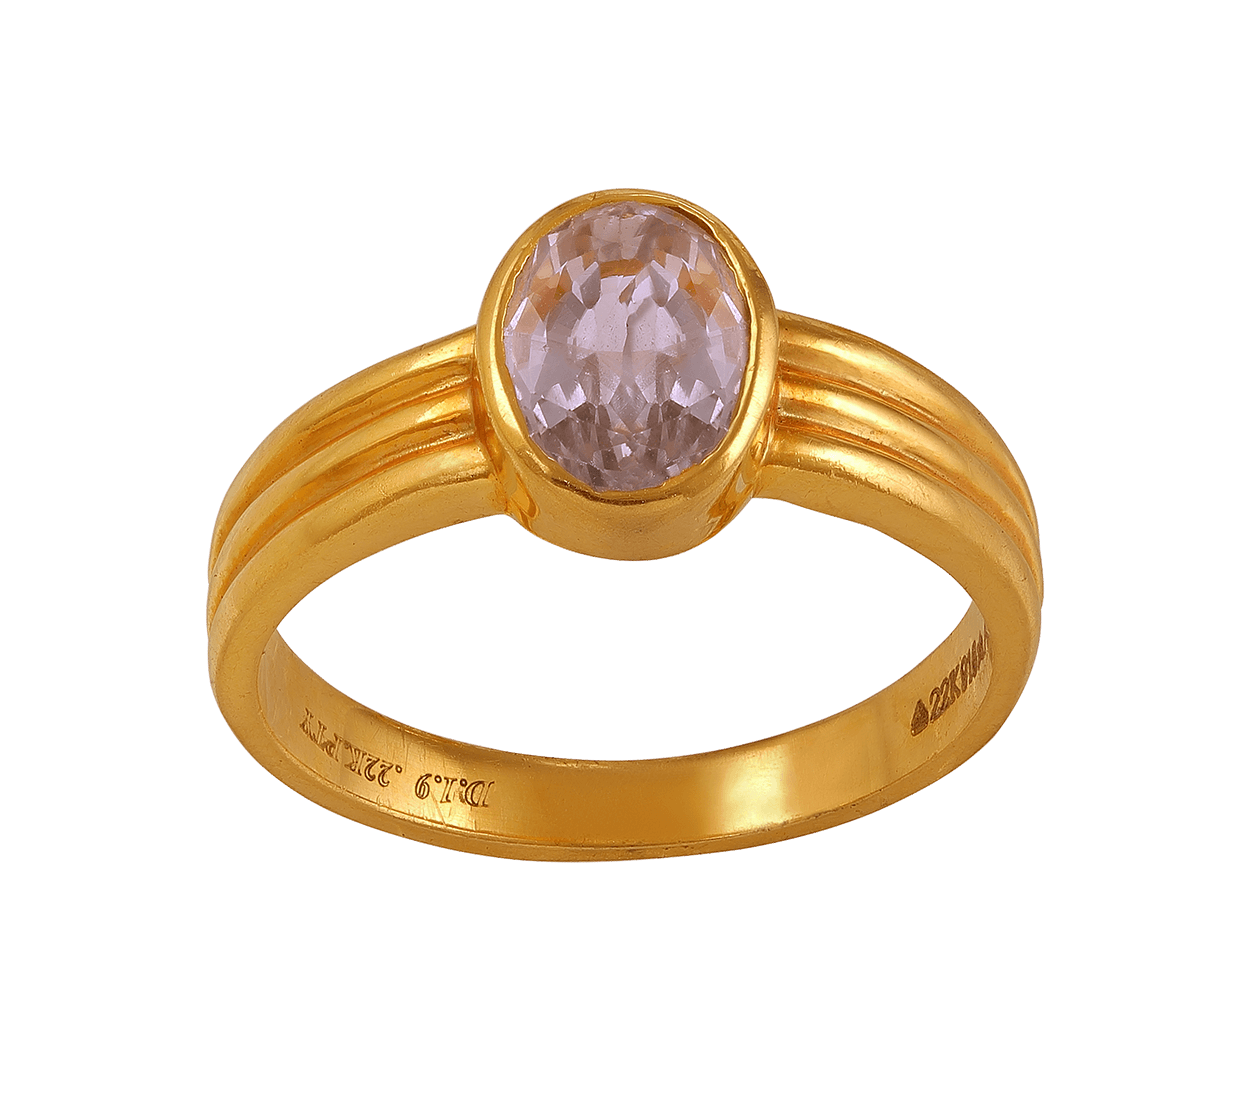 Gold Ring With White Stone for Men & Women at Candere by Kalyan Jewellers.-tuongthan.vn